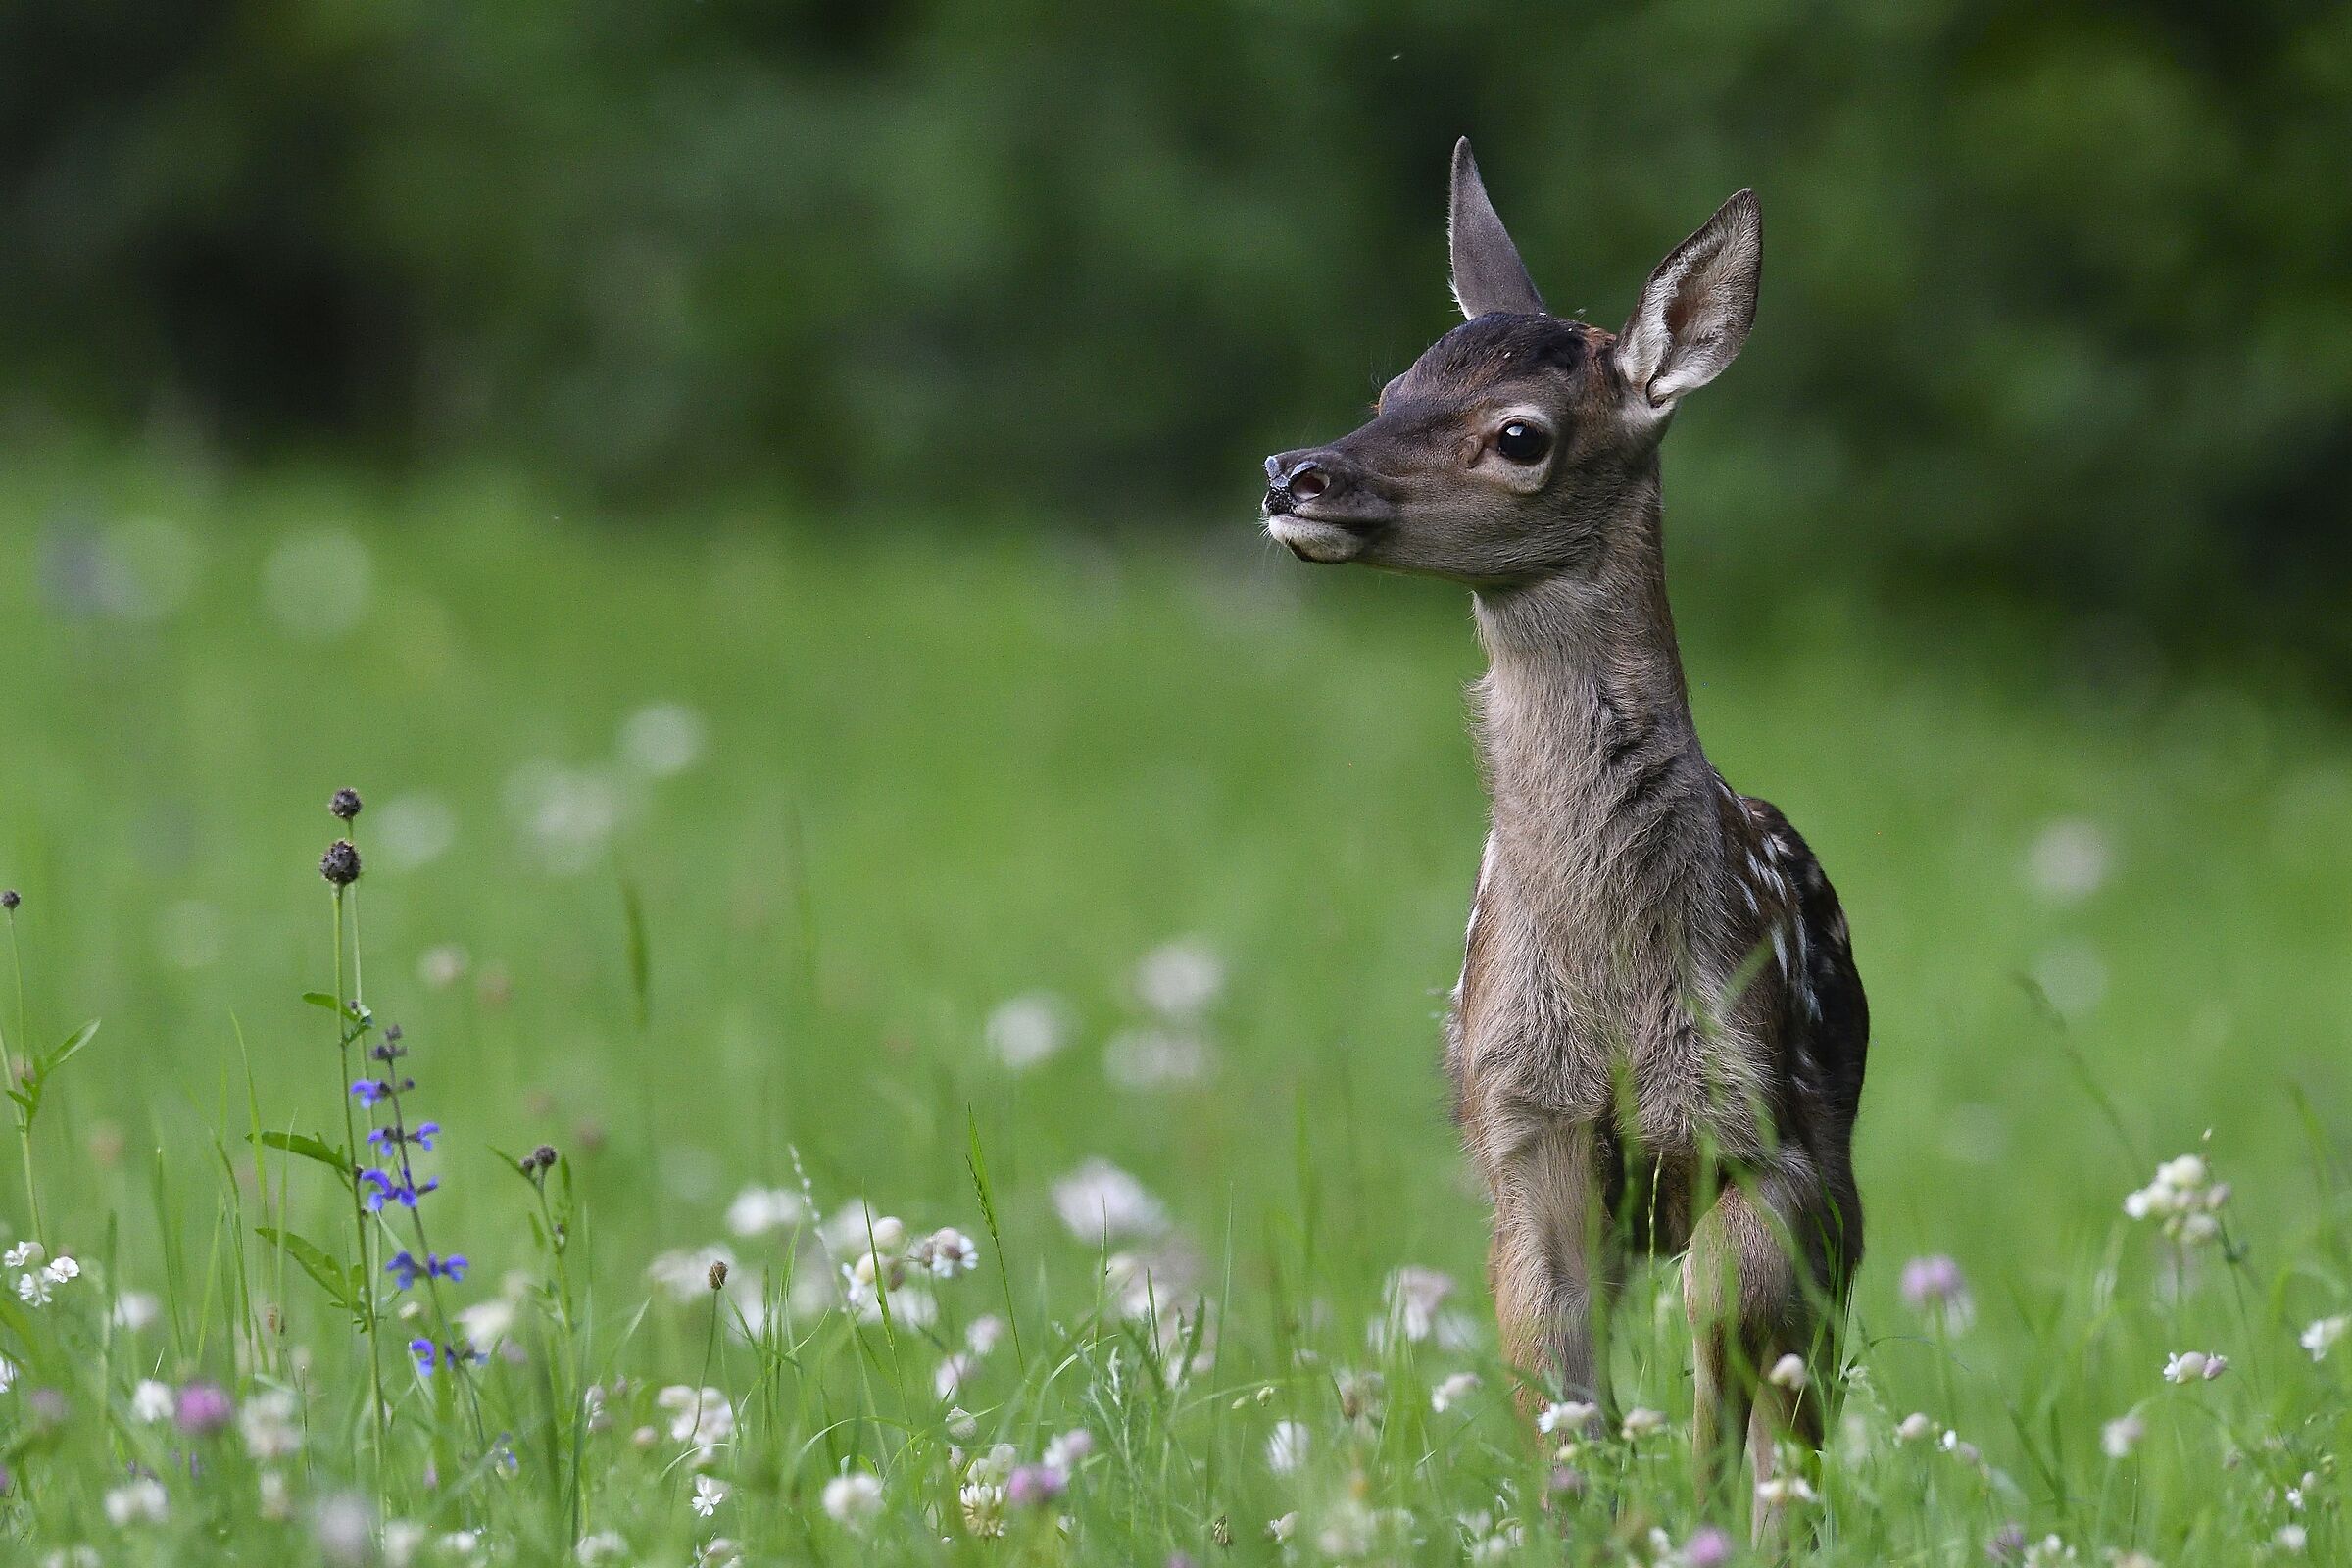 The young deer ...